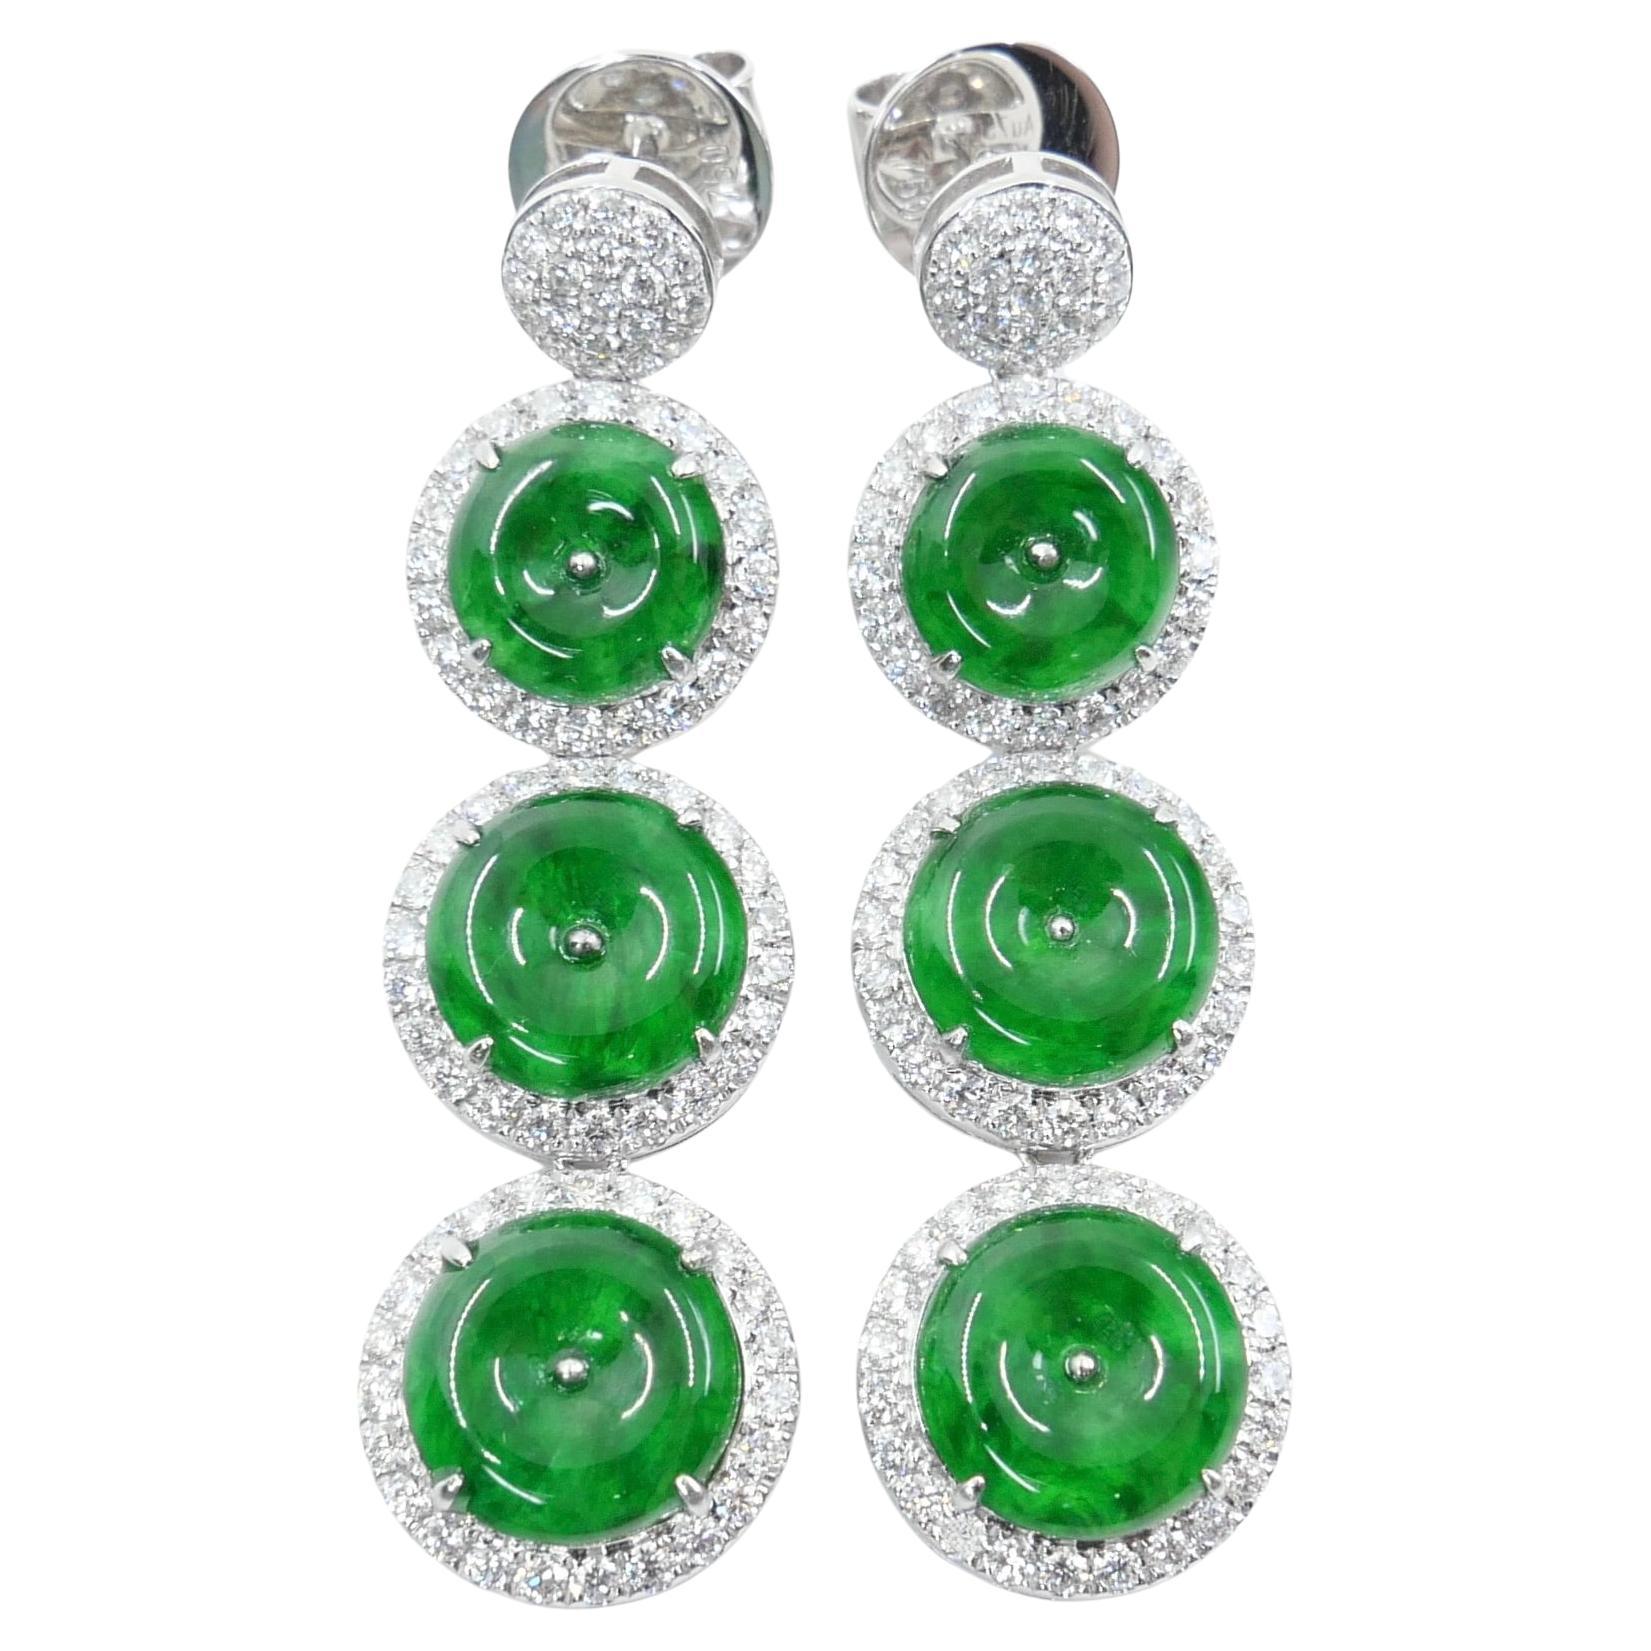 Certified Natural Jade & Diamond Drop Earrings. Spinach & Imperial Green Color For Sale